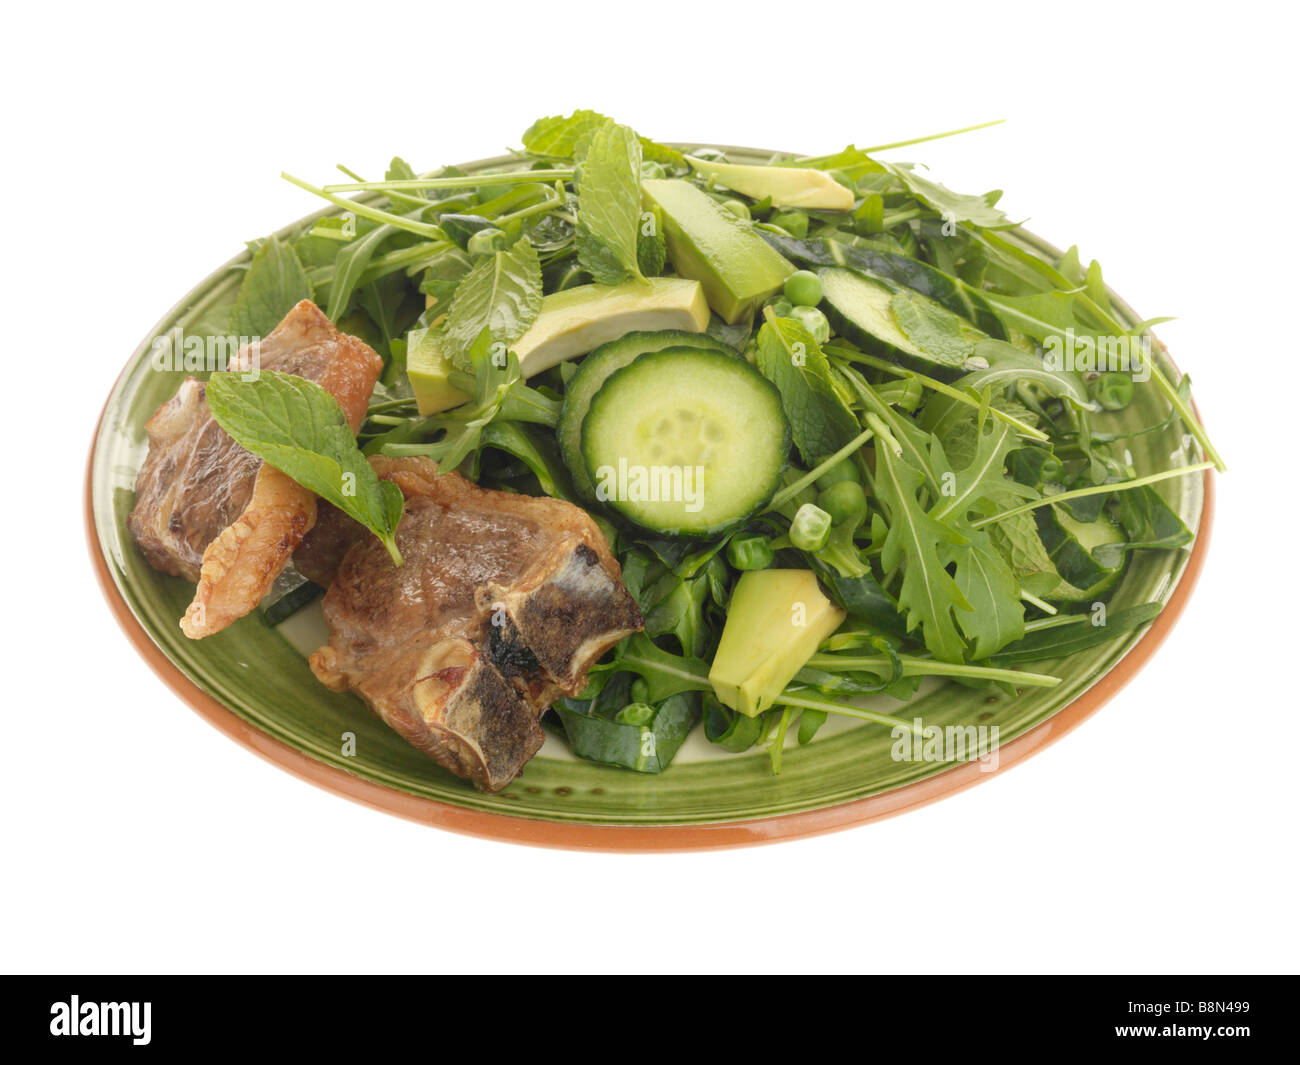 Freshly Cooked Tender Sweet Lamb Chops With Avocado Salad and Rocket leaves Isolated Against A White Background With No People And A Clipping Path Stock Photo